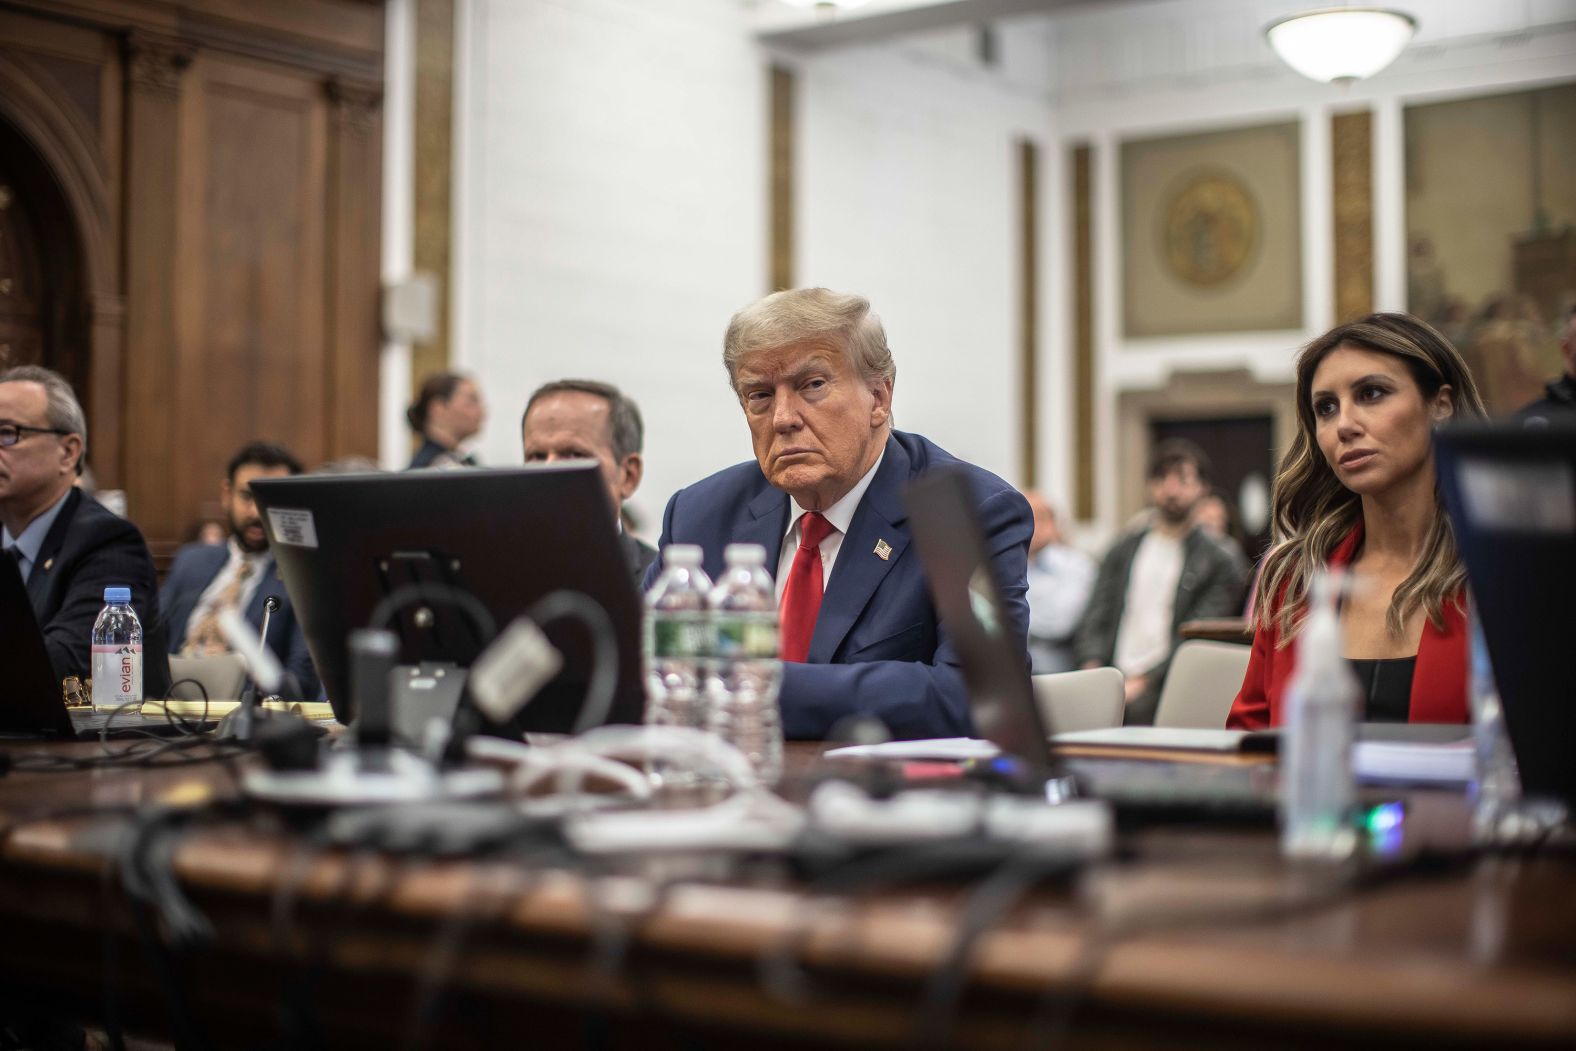 Trump is flanked by members of his legal team on October 3. The former president, who's actively campaigning for a second term, faces an increasingly packed calendar of criminal and civil litigation as the 2024 election nears. He faces <a href="index.php?page=&url=https%3A%2F%2Fwww.cnn.com%2Finteractive%2F2023%2F07%2Fpolitics%2Ftrump-indictments-criminal-cases%2F" target="_blank">four criminal indictments</a> handed down this year, as well as other civil litigation.